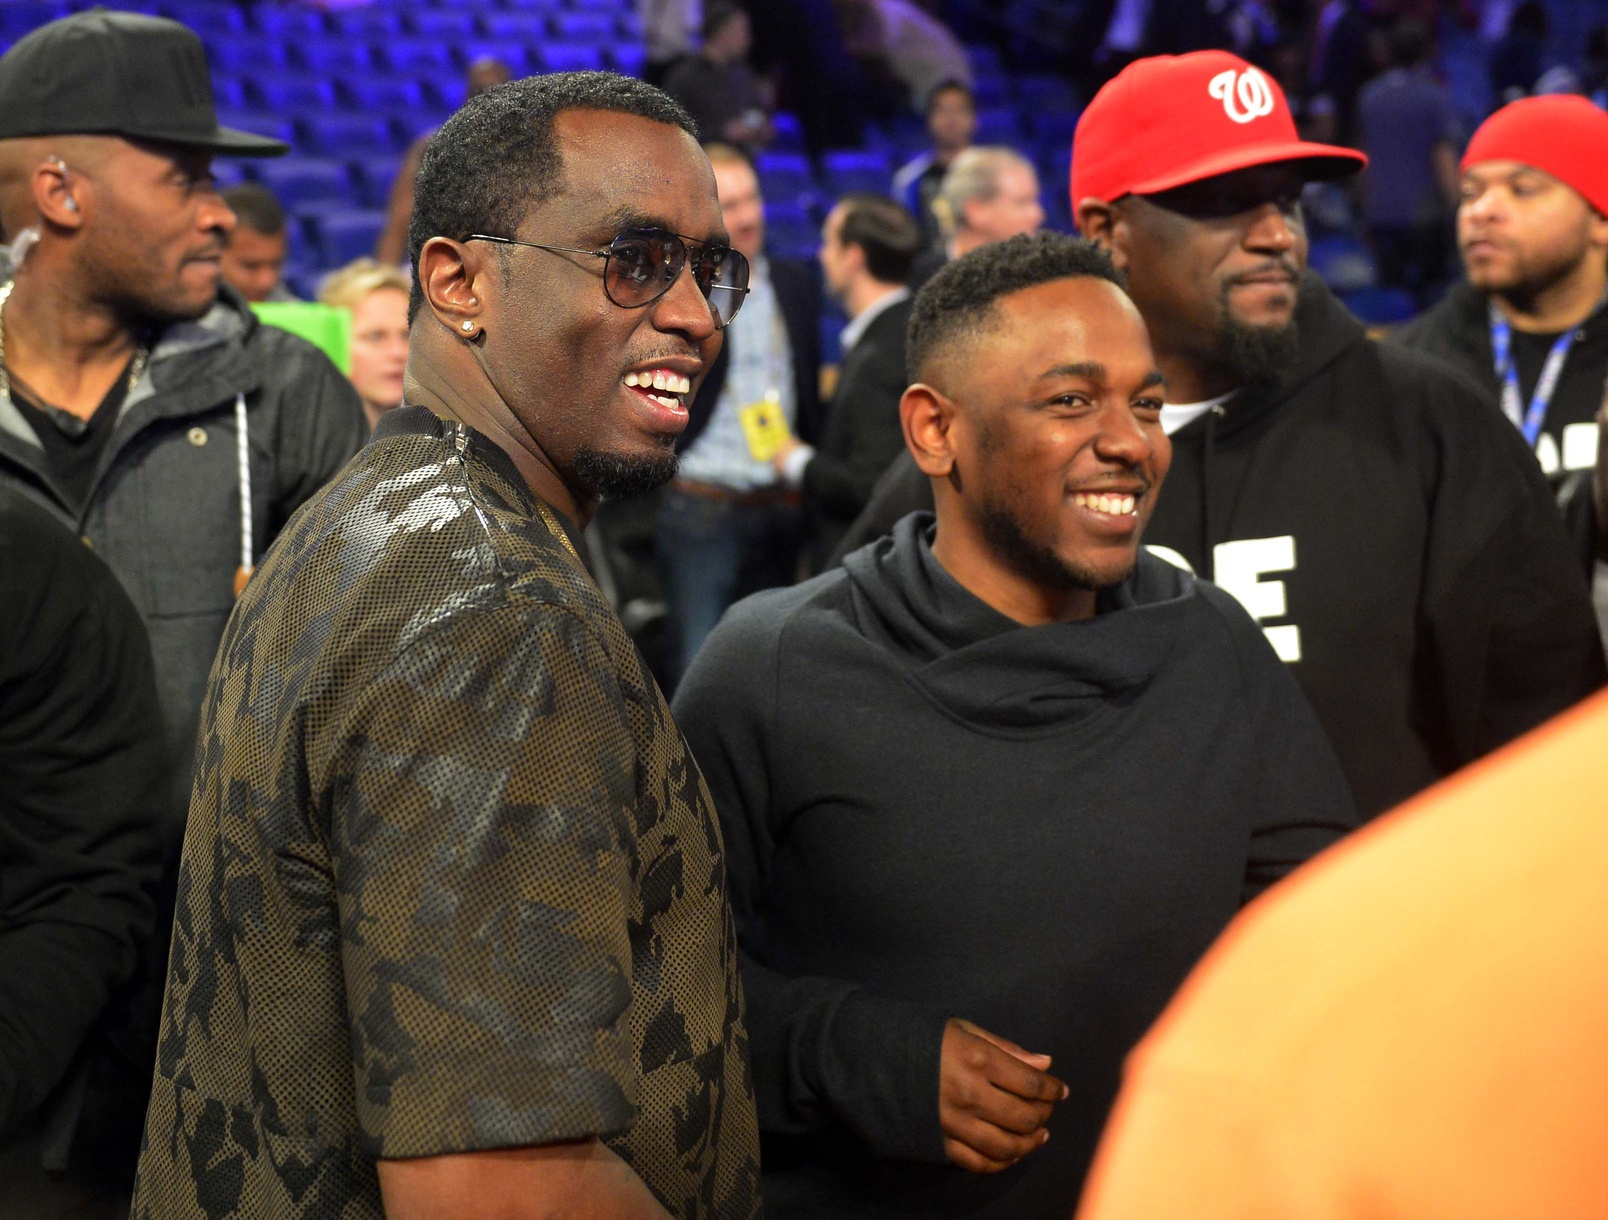 Report: Sean 'Diddy' Combs Arrested for Allegedly Assaulting UCLA Football Coach